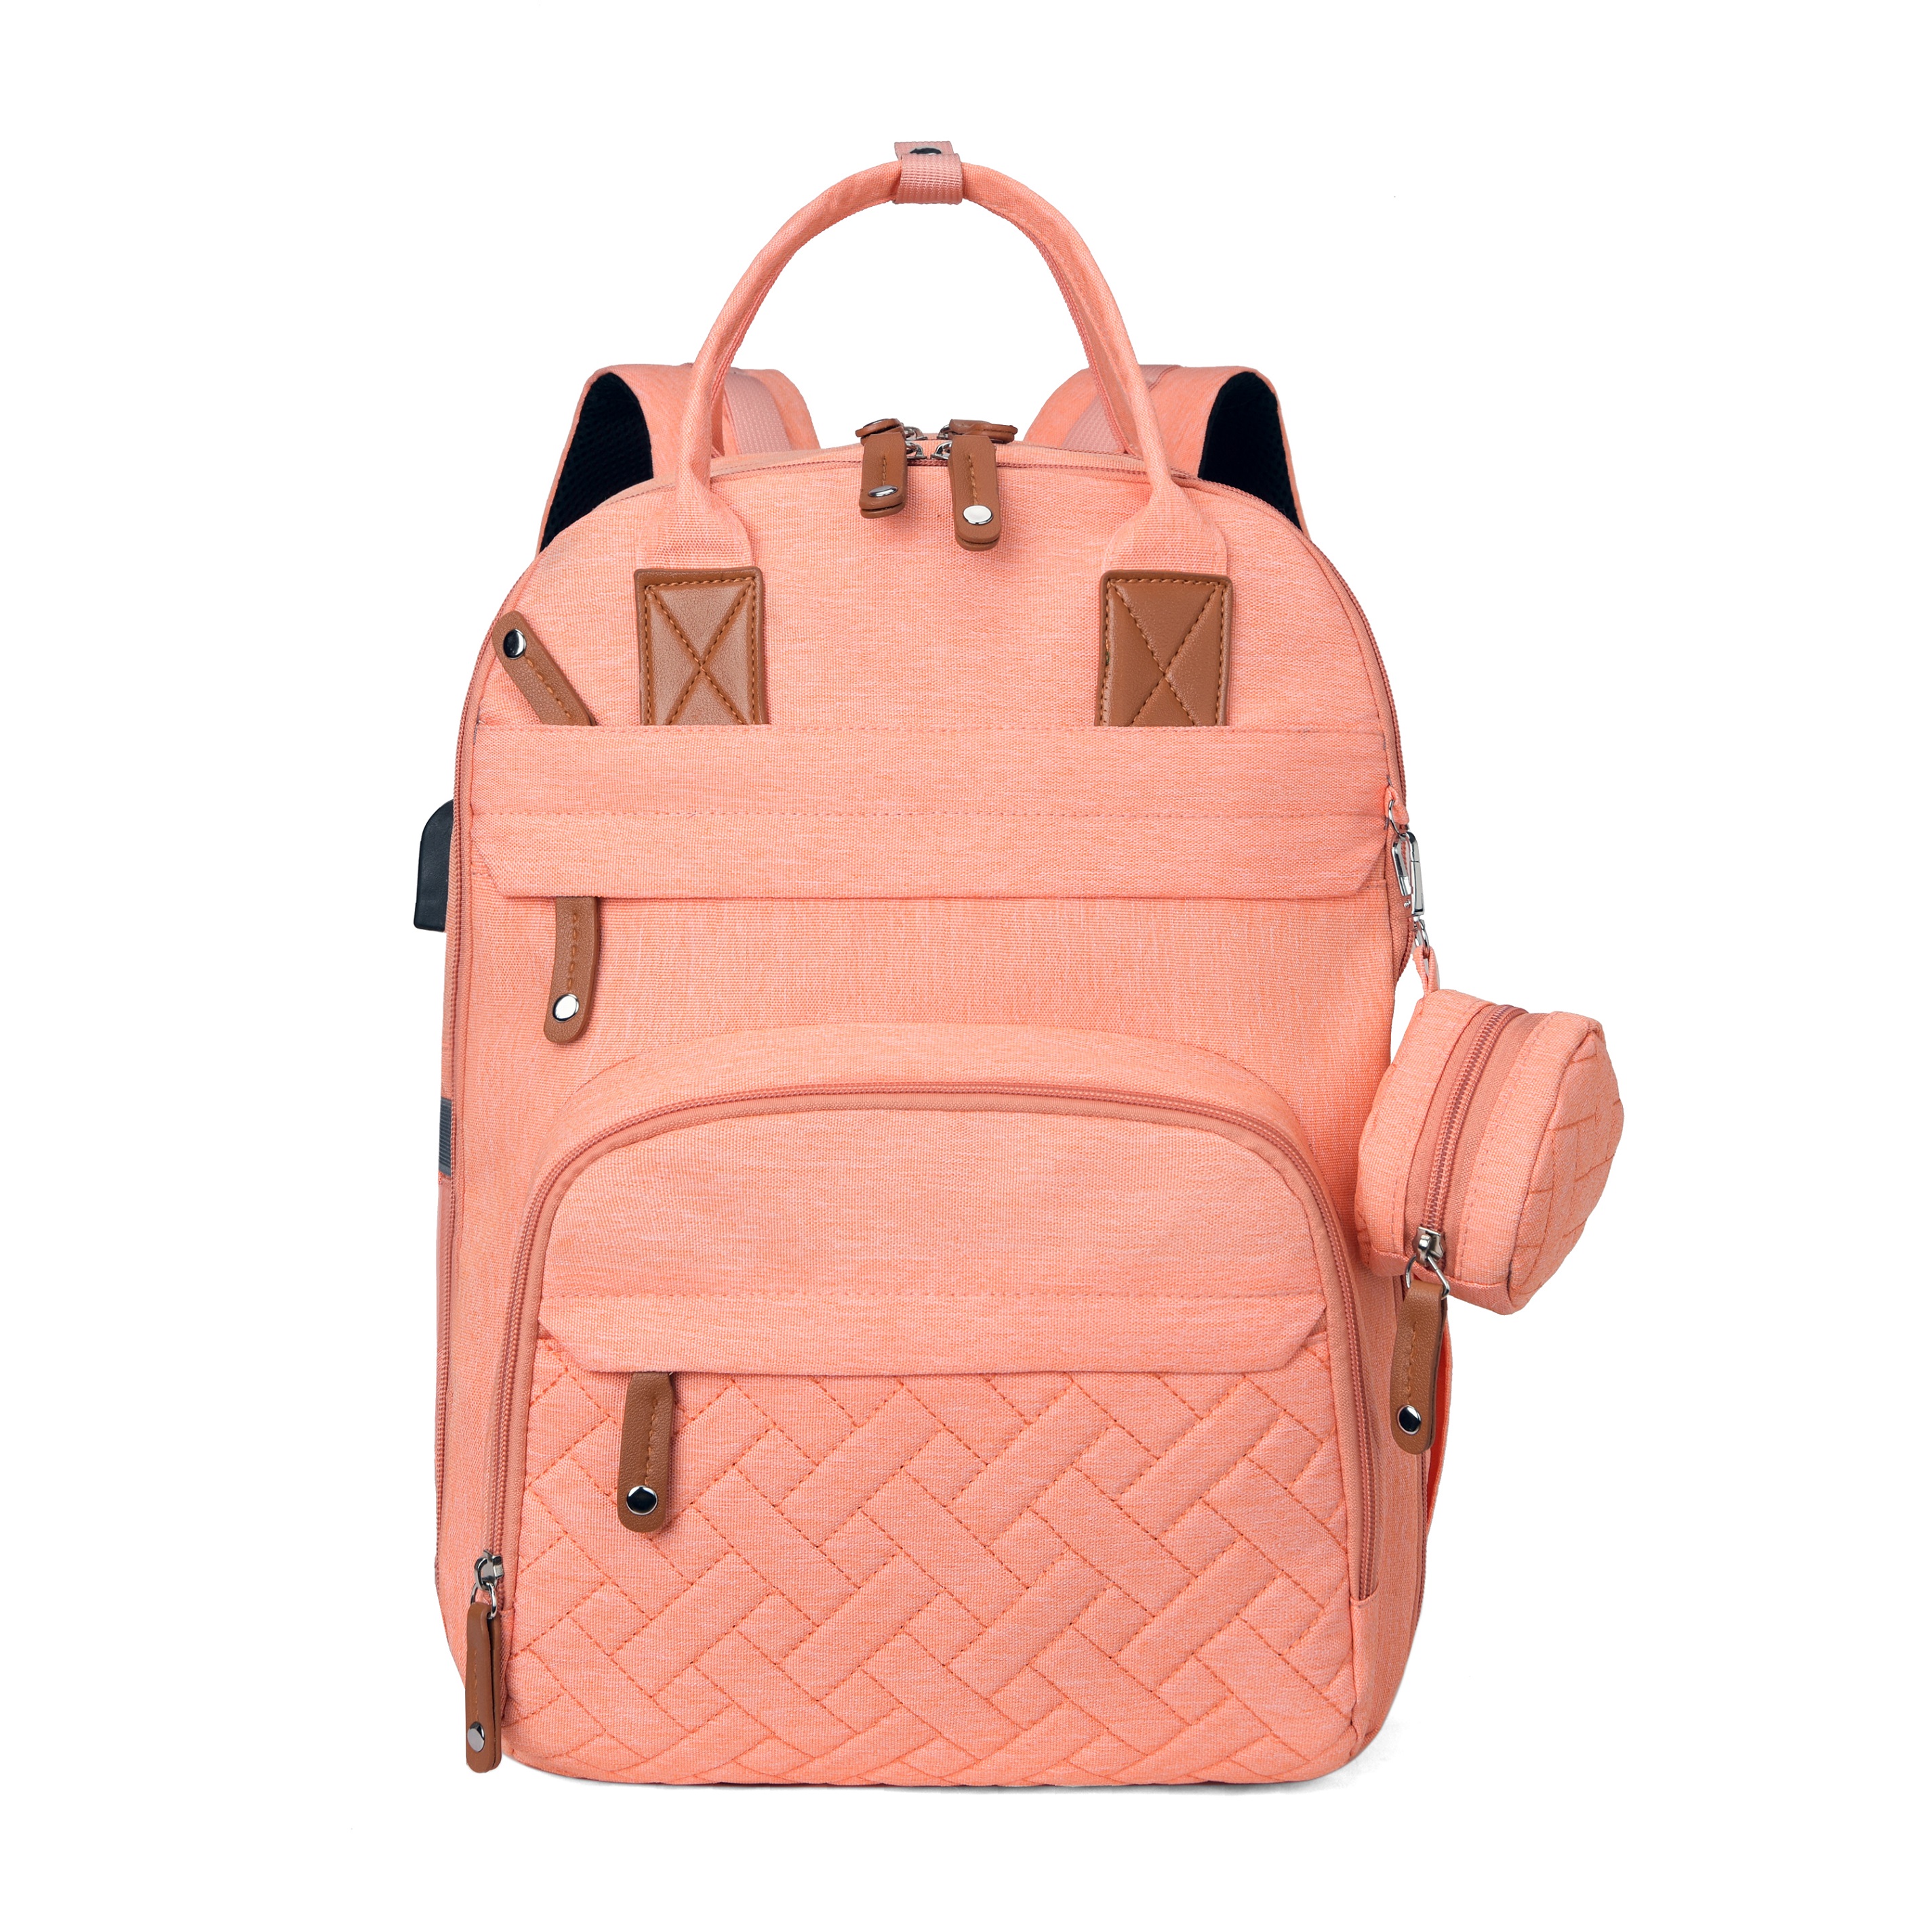 Stylish Women's Diaper Bags: Maternity Backpack With Large